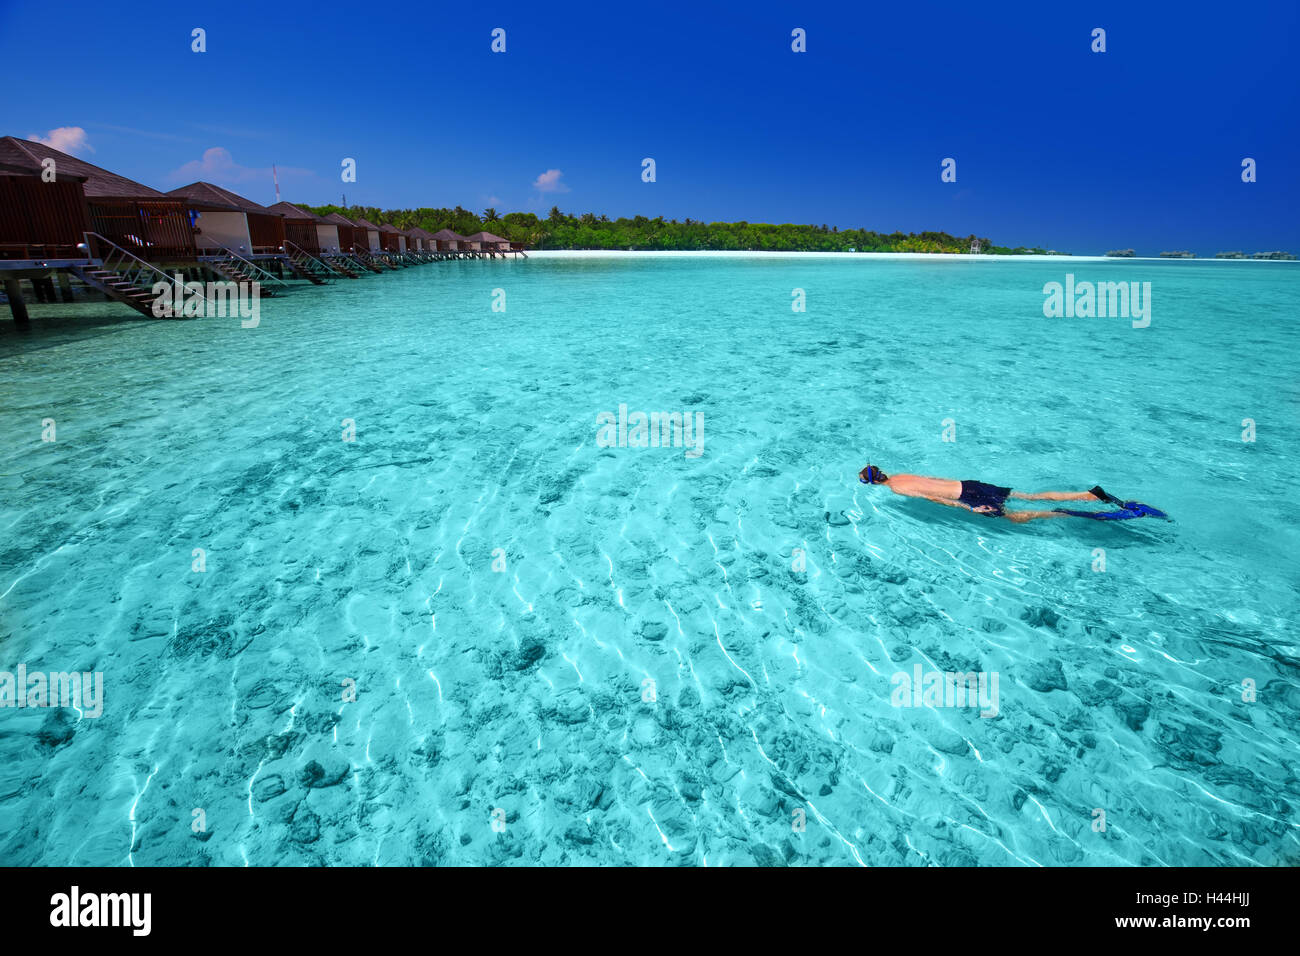 Young man snorkeling in tropical island with sandy beach, palm trees, overwater bungalows and turquoise clear water Stock Photo